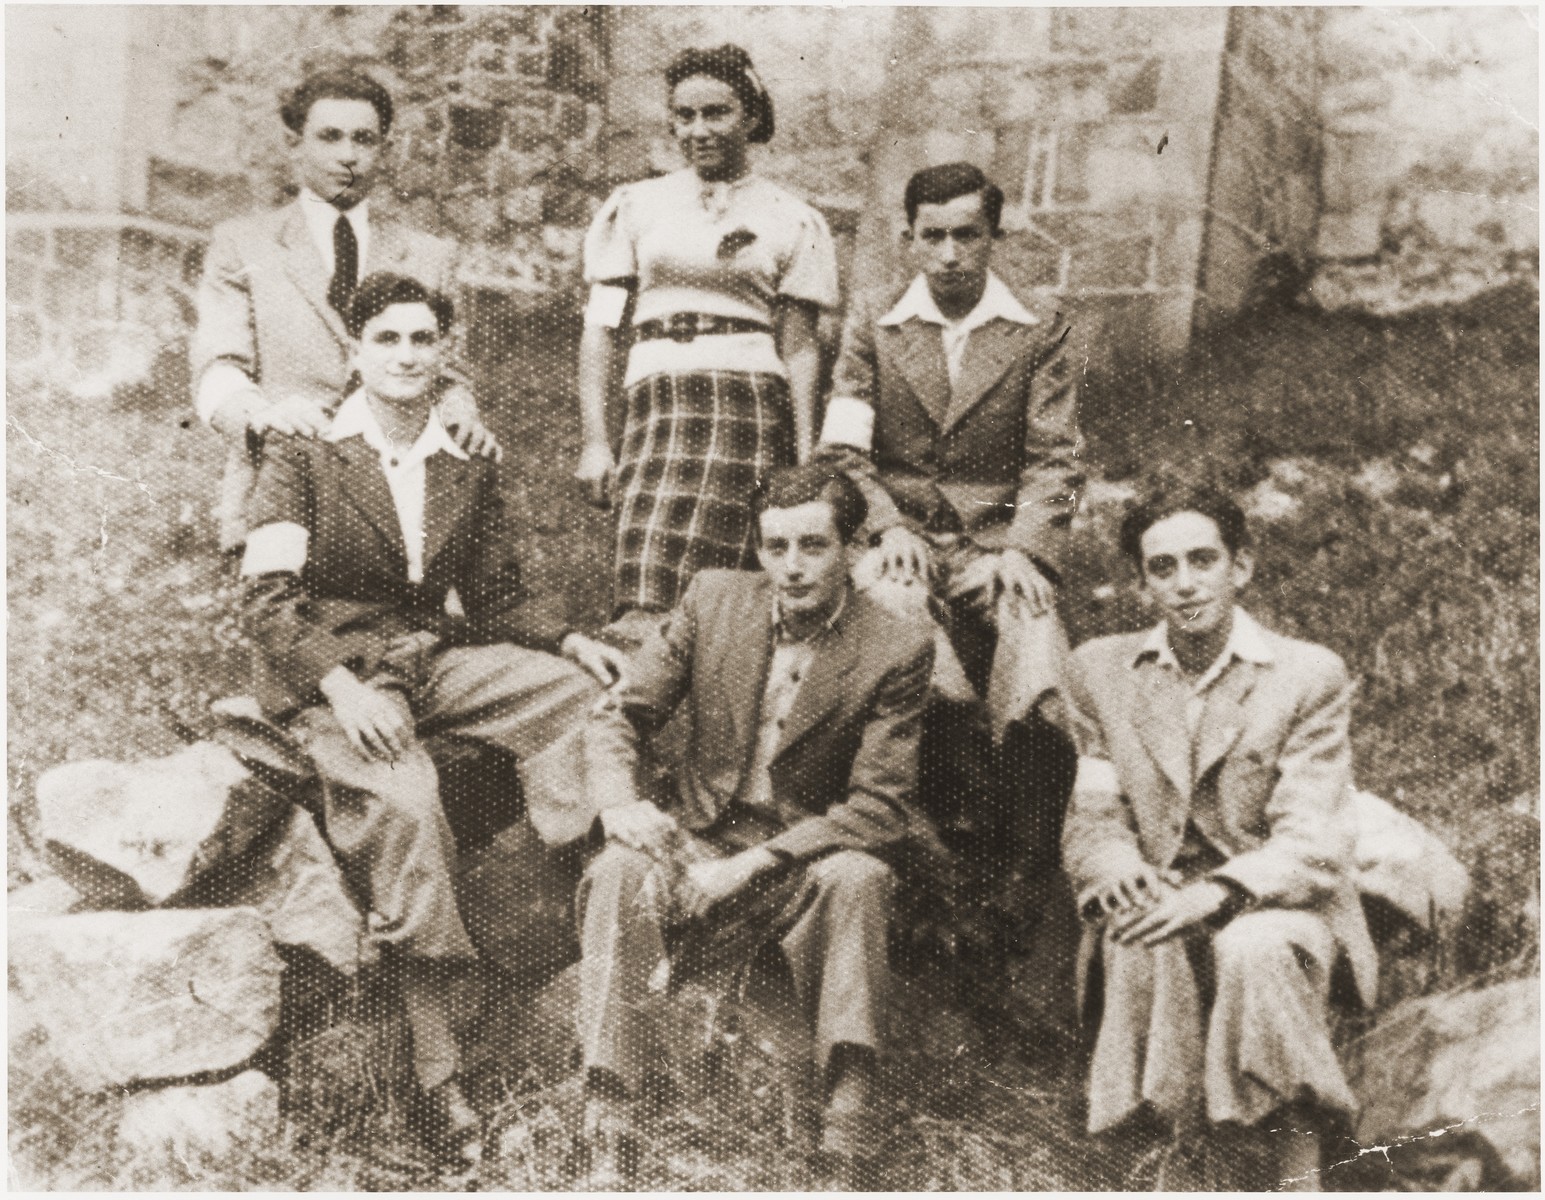 Group portrait of members of the Akiva Zionist youth group wearing armbands in the Wisnicz ghetto.

Among those pictured are: William Wiener, Sala Schoen, Maniek Wiener and Meyer Schoen.